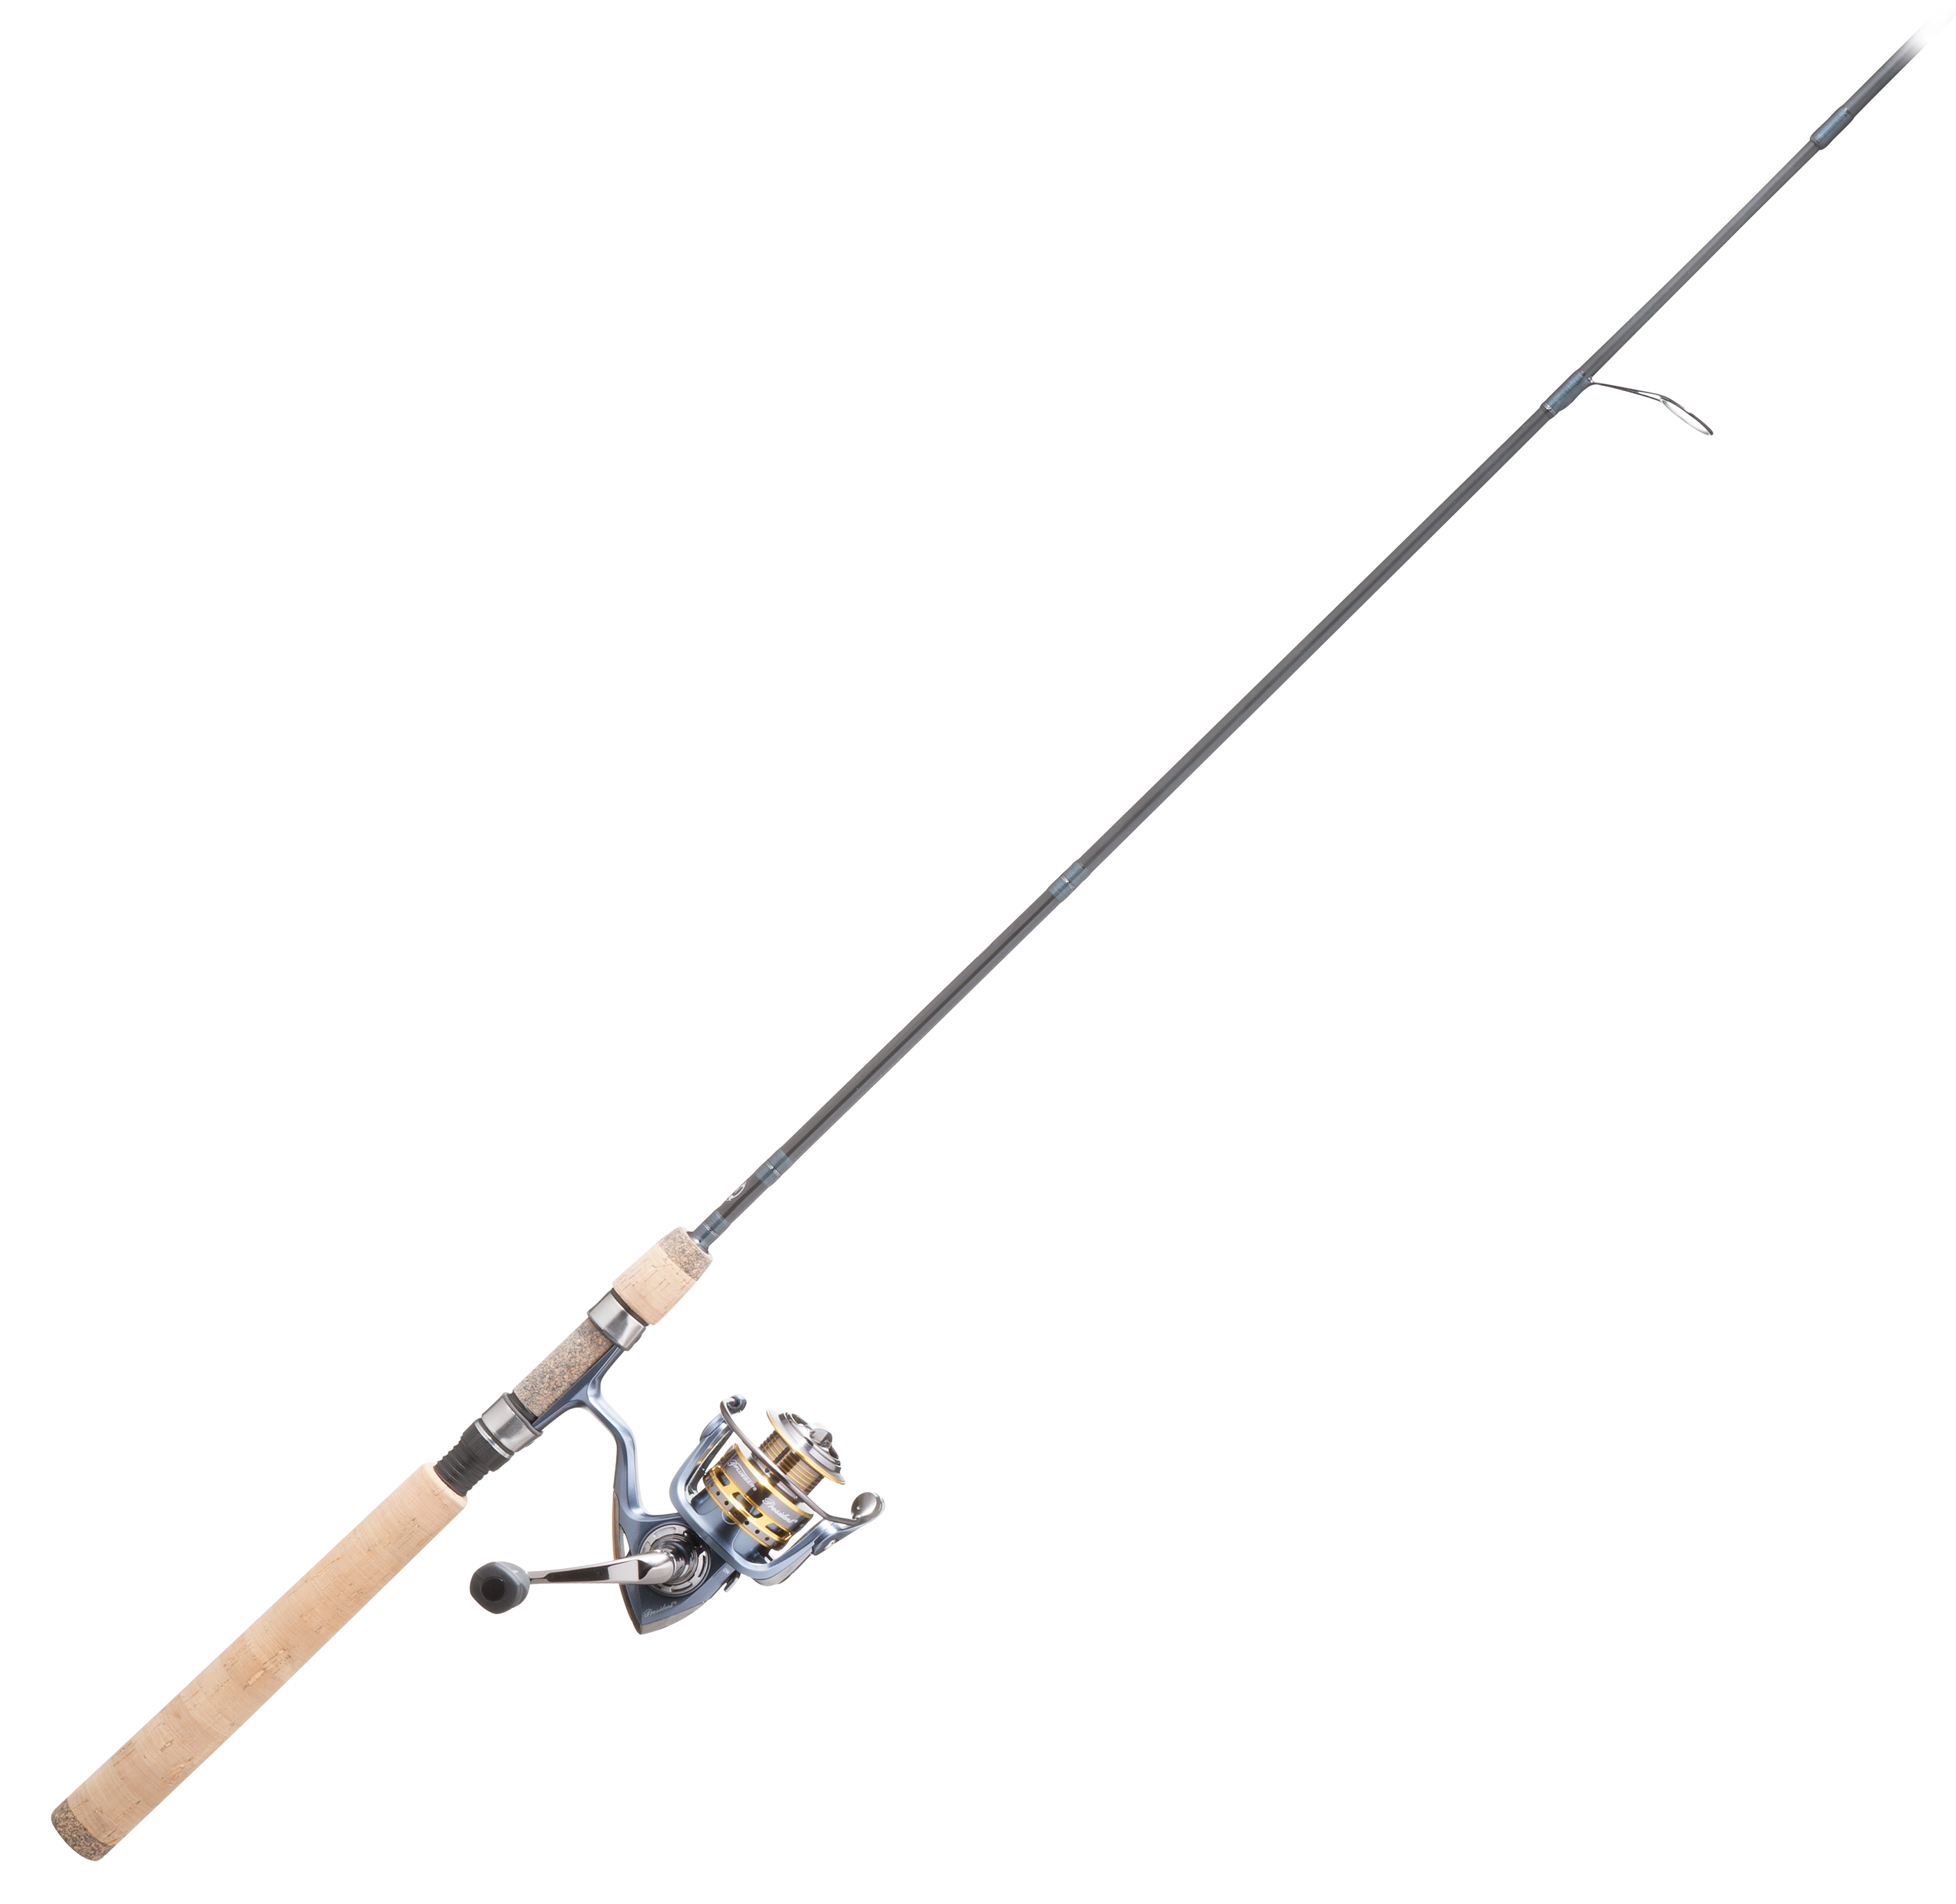 Pflueger President/Bass Pro Shops Micro Lite Spinning Rod and Reel Combo - Model PRESSP35X/MIL66MS-4